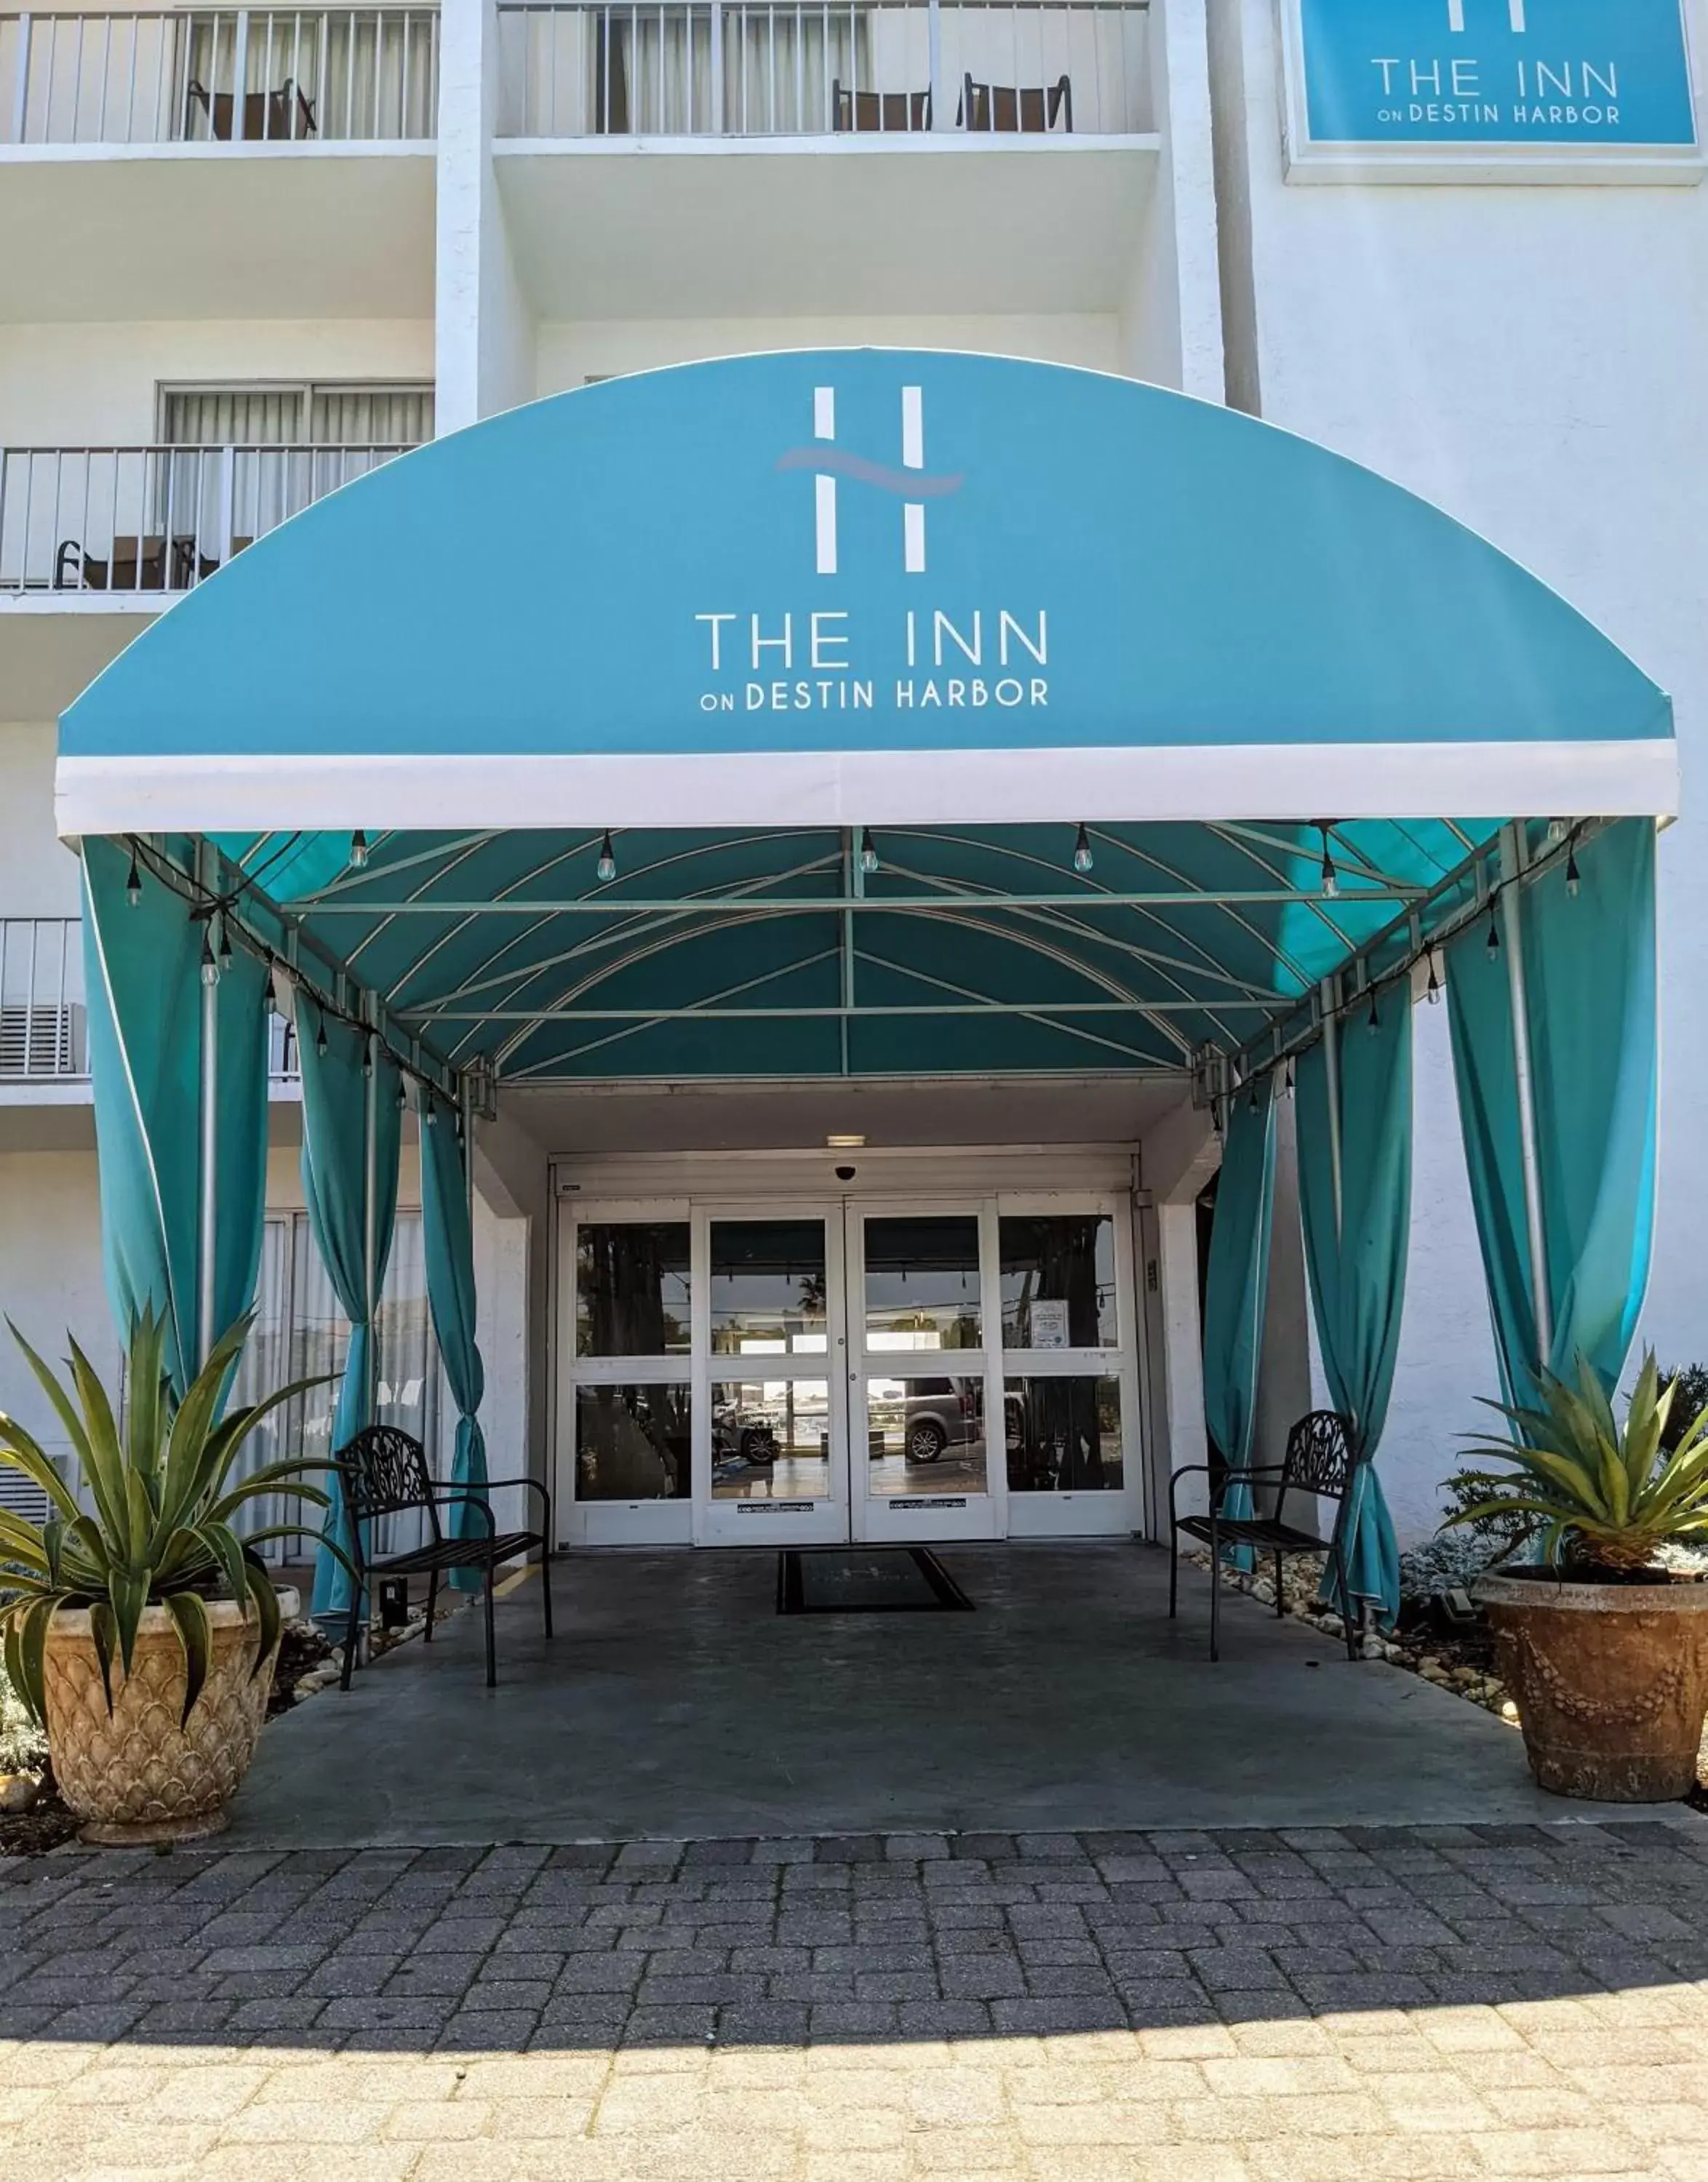 Property building in Inn on Destin Harbor, Ascend Hotel Collection